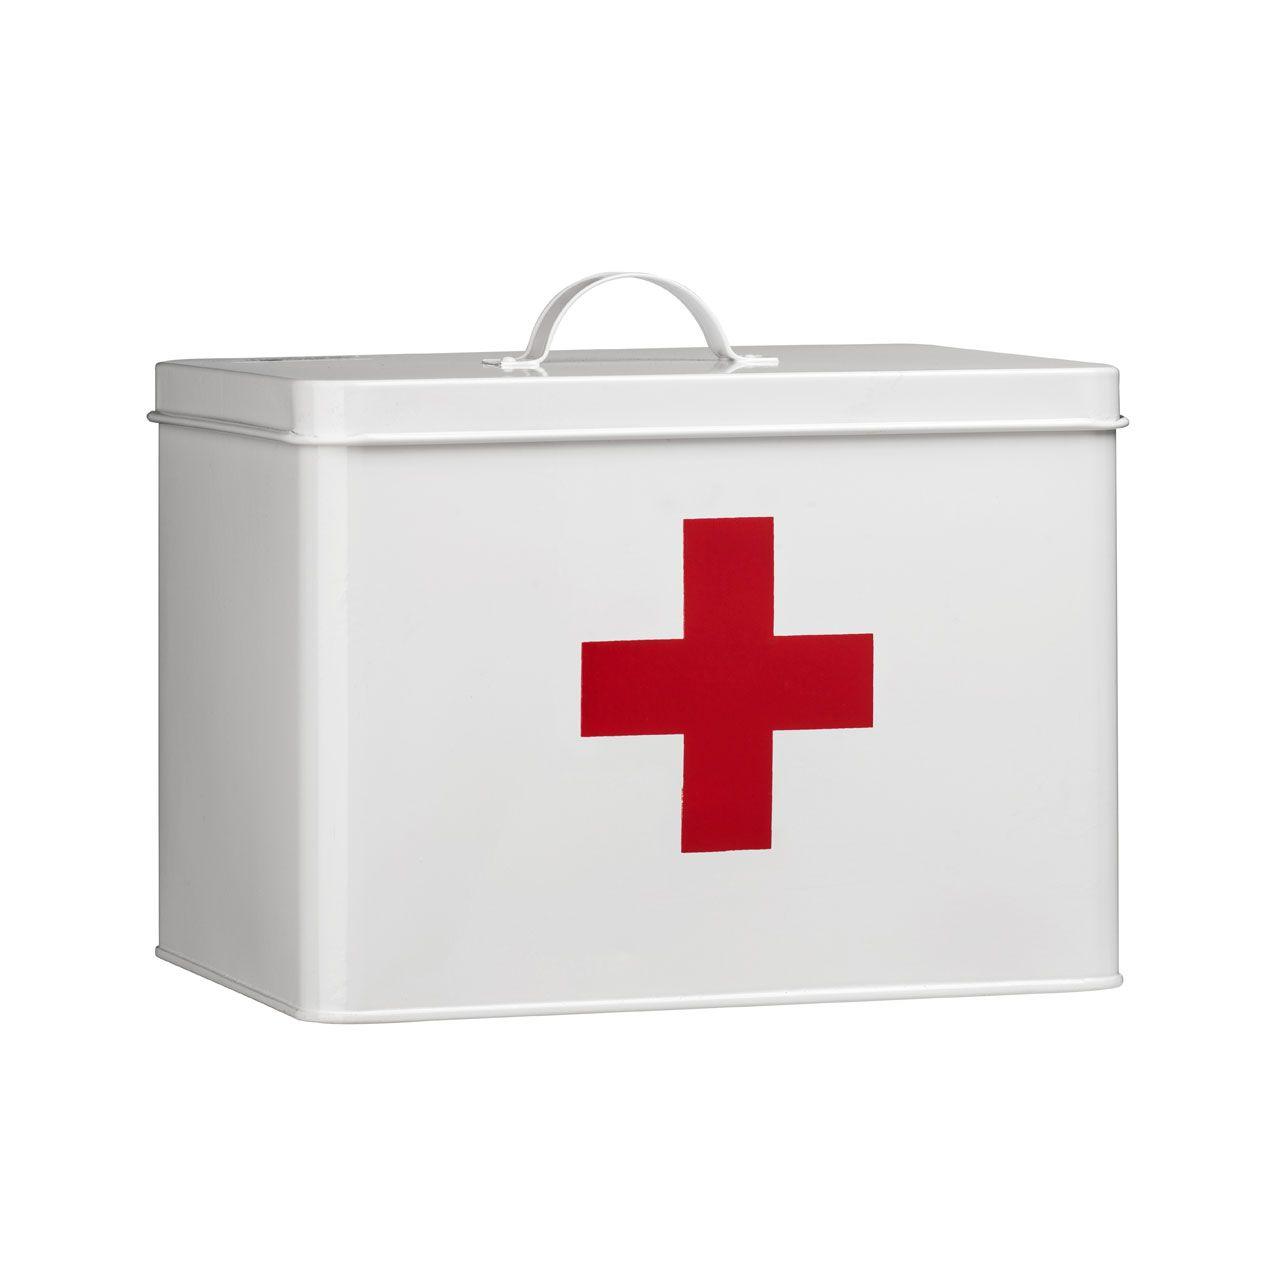 White Box Red Cross Logo - Emergency Kit Medicine First Aid Metal Small Box White Red Cross ...